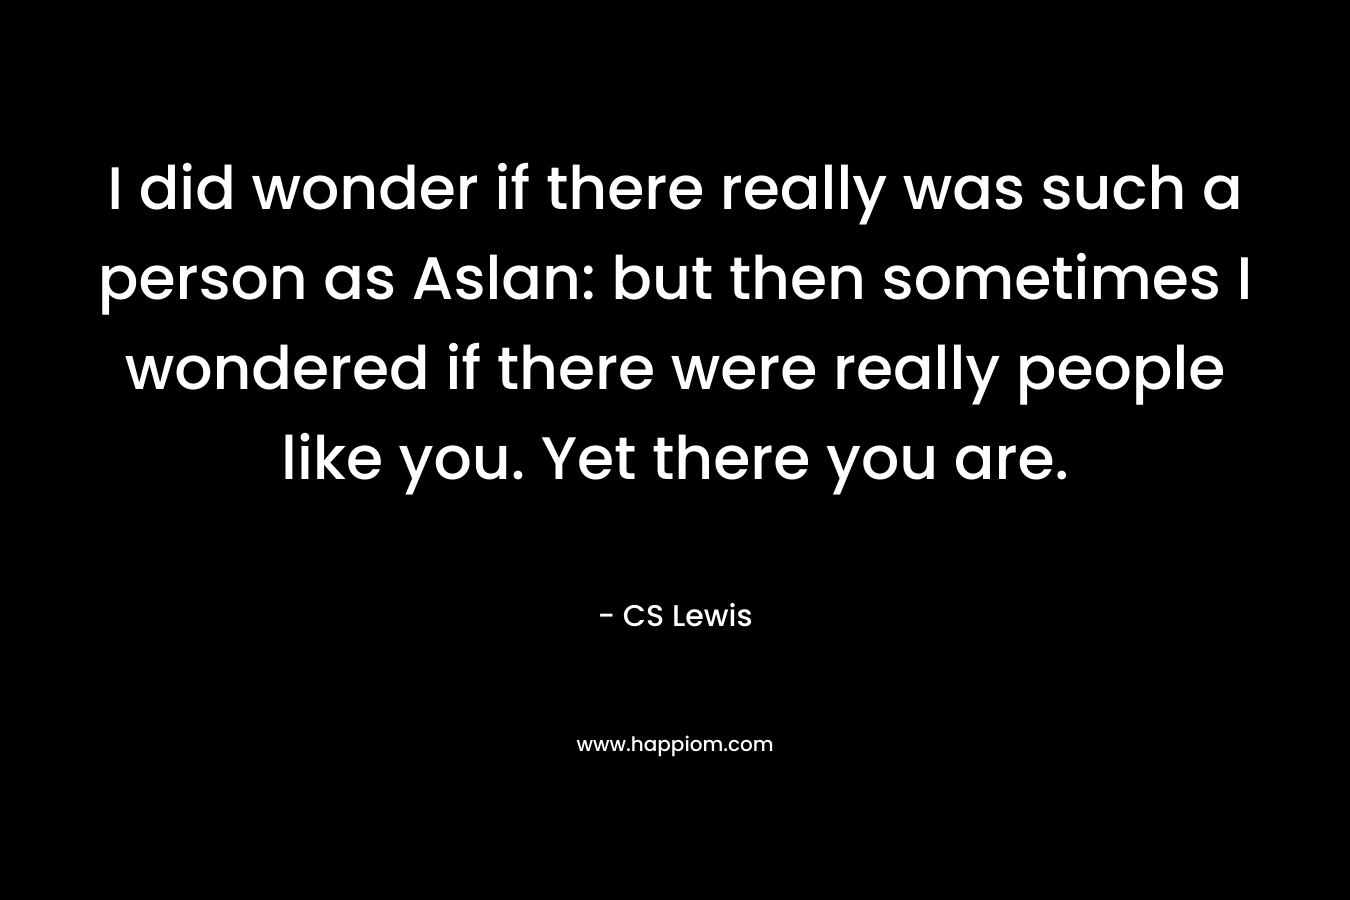 I did wonder if there really was such a person as Aslan: but then sometimes I wondered if there were really people like you. Yet there you are. – CS Lewis